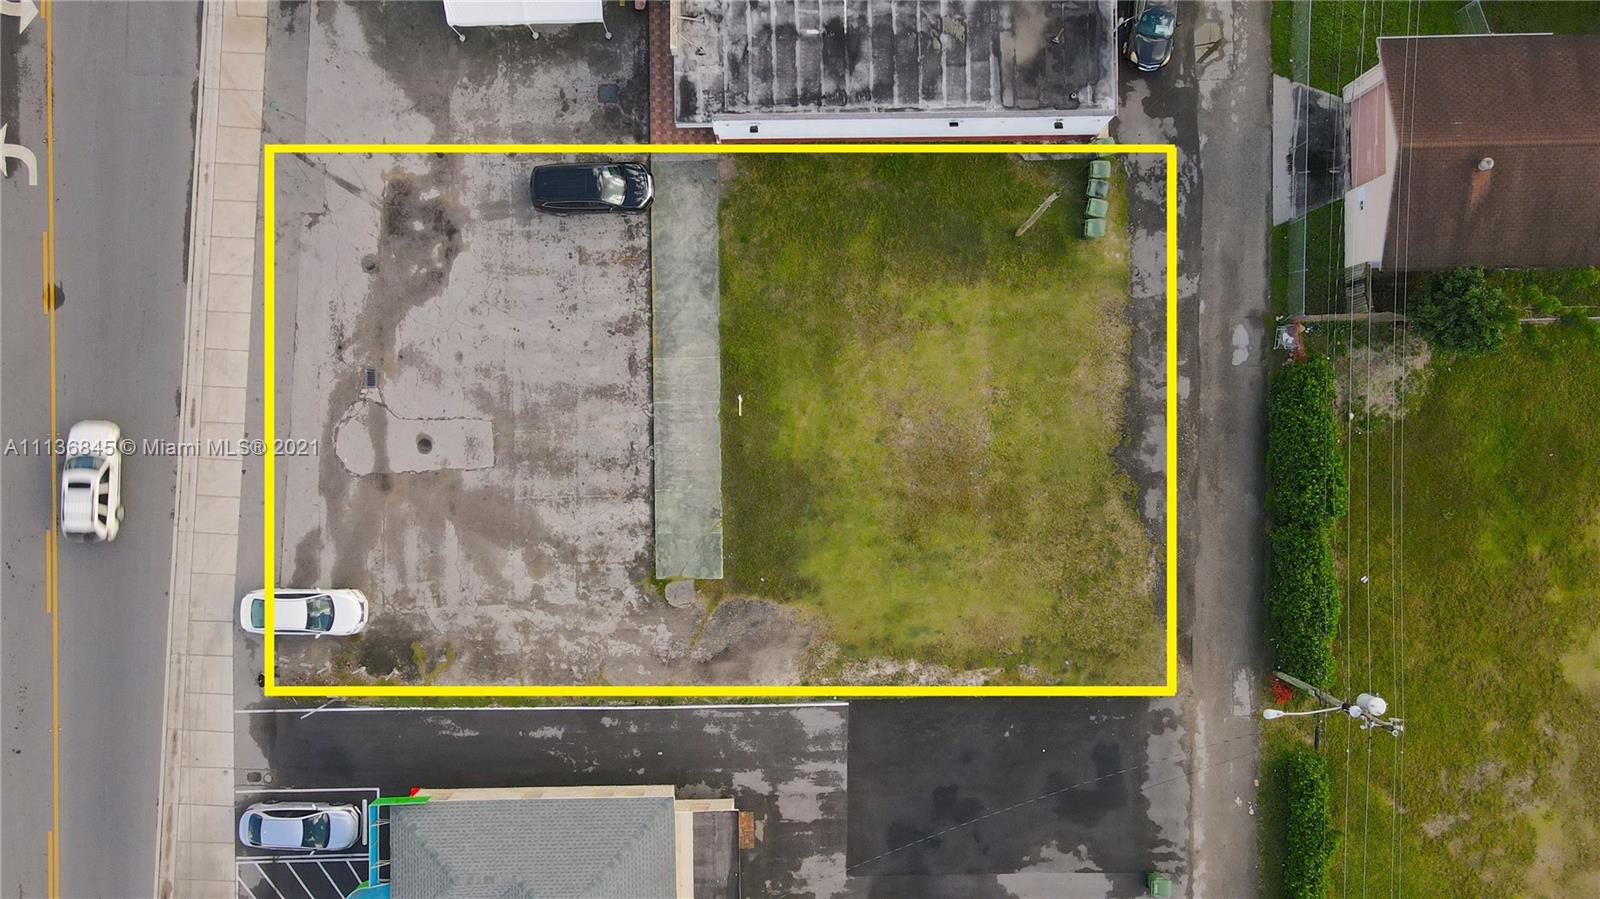 Rare opportunity to buy a quarter of an acre (9,788 Sq.Ft) of commercially zoned vacant land just a few blocks away from US 1. Don't miss this chance. This Deal will not last.